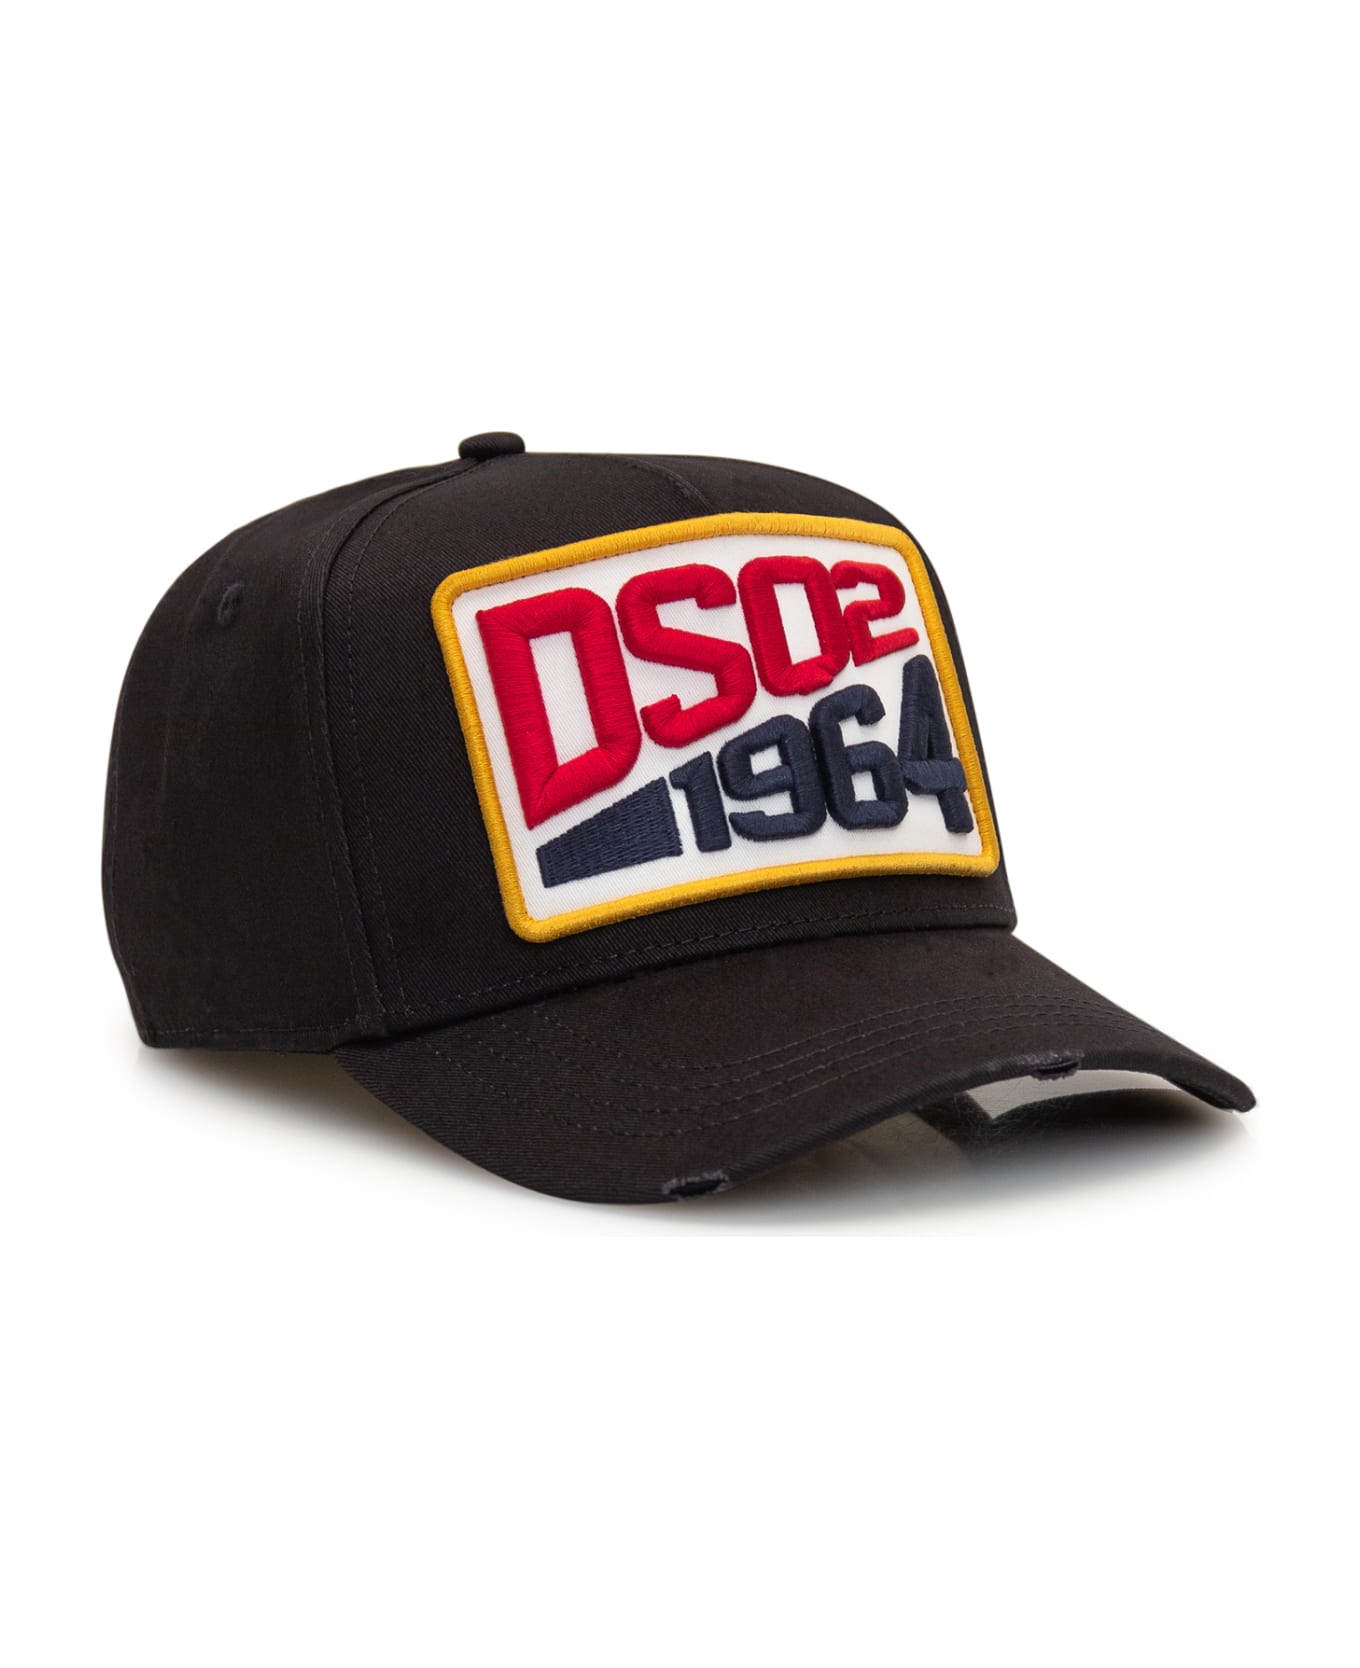 Dsquared2 Black Baseball Cap With Patch - Black